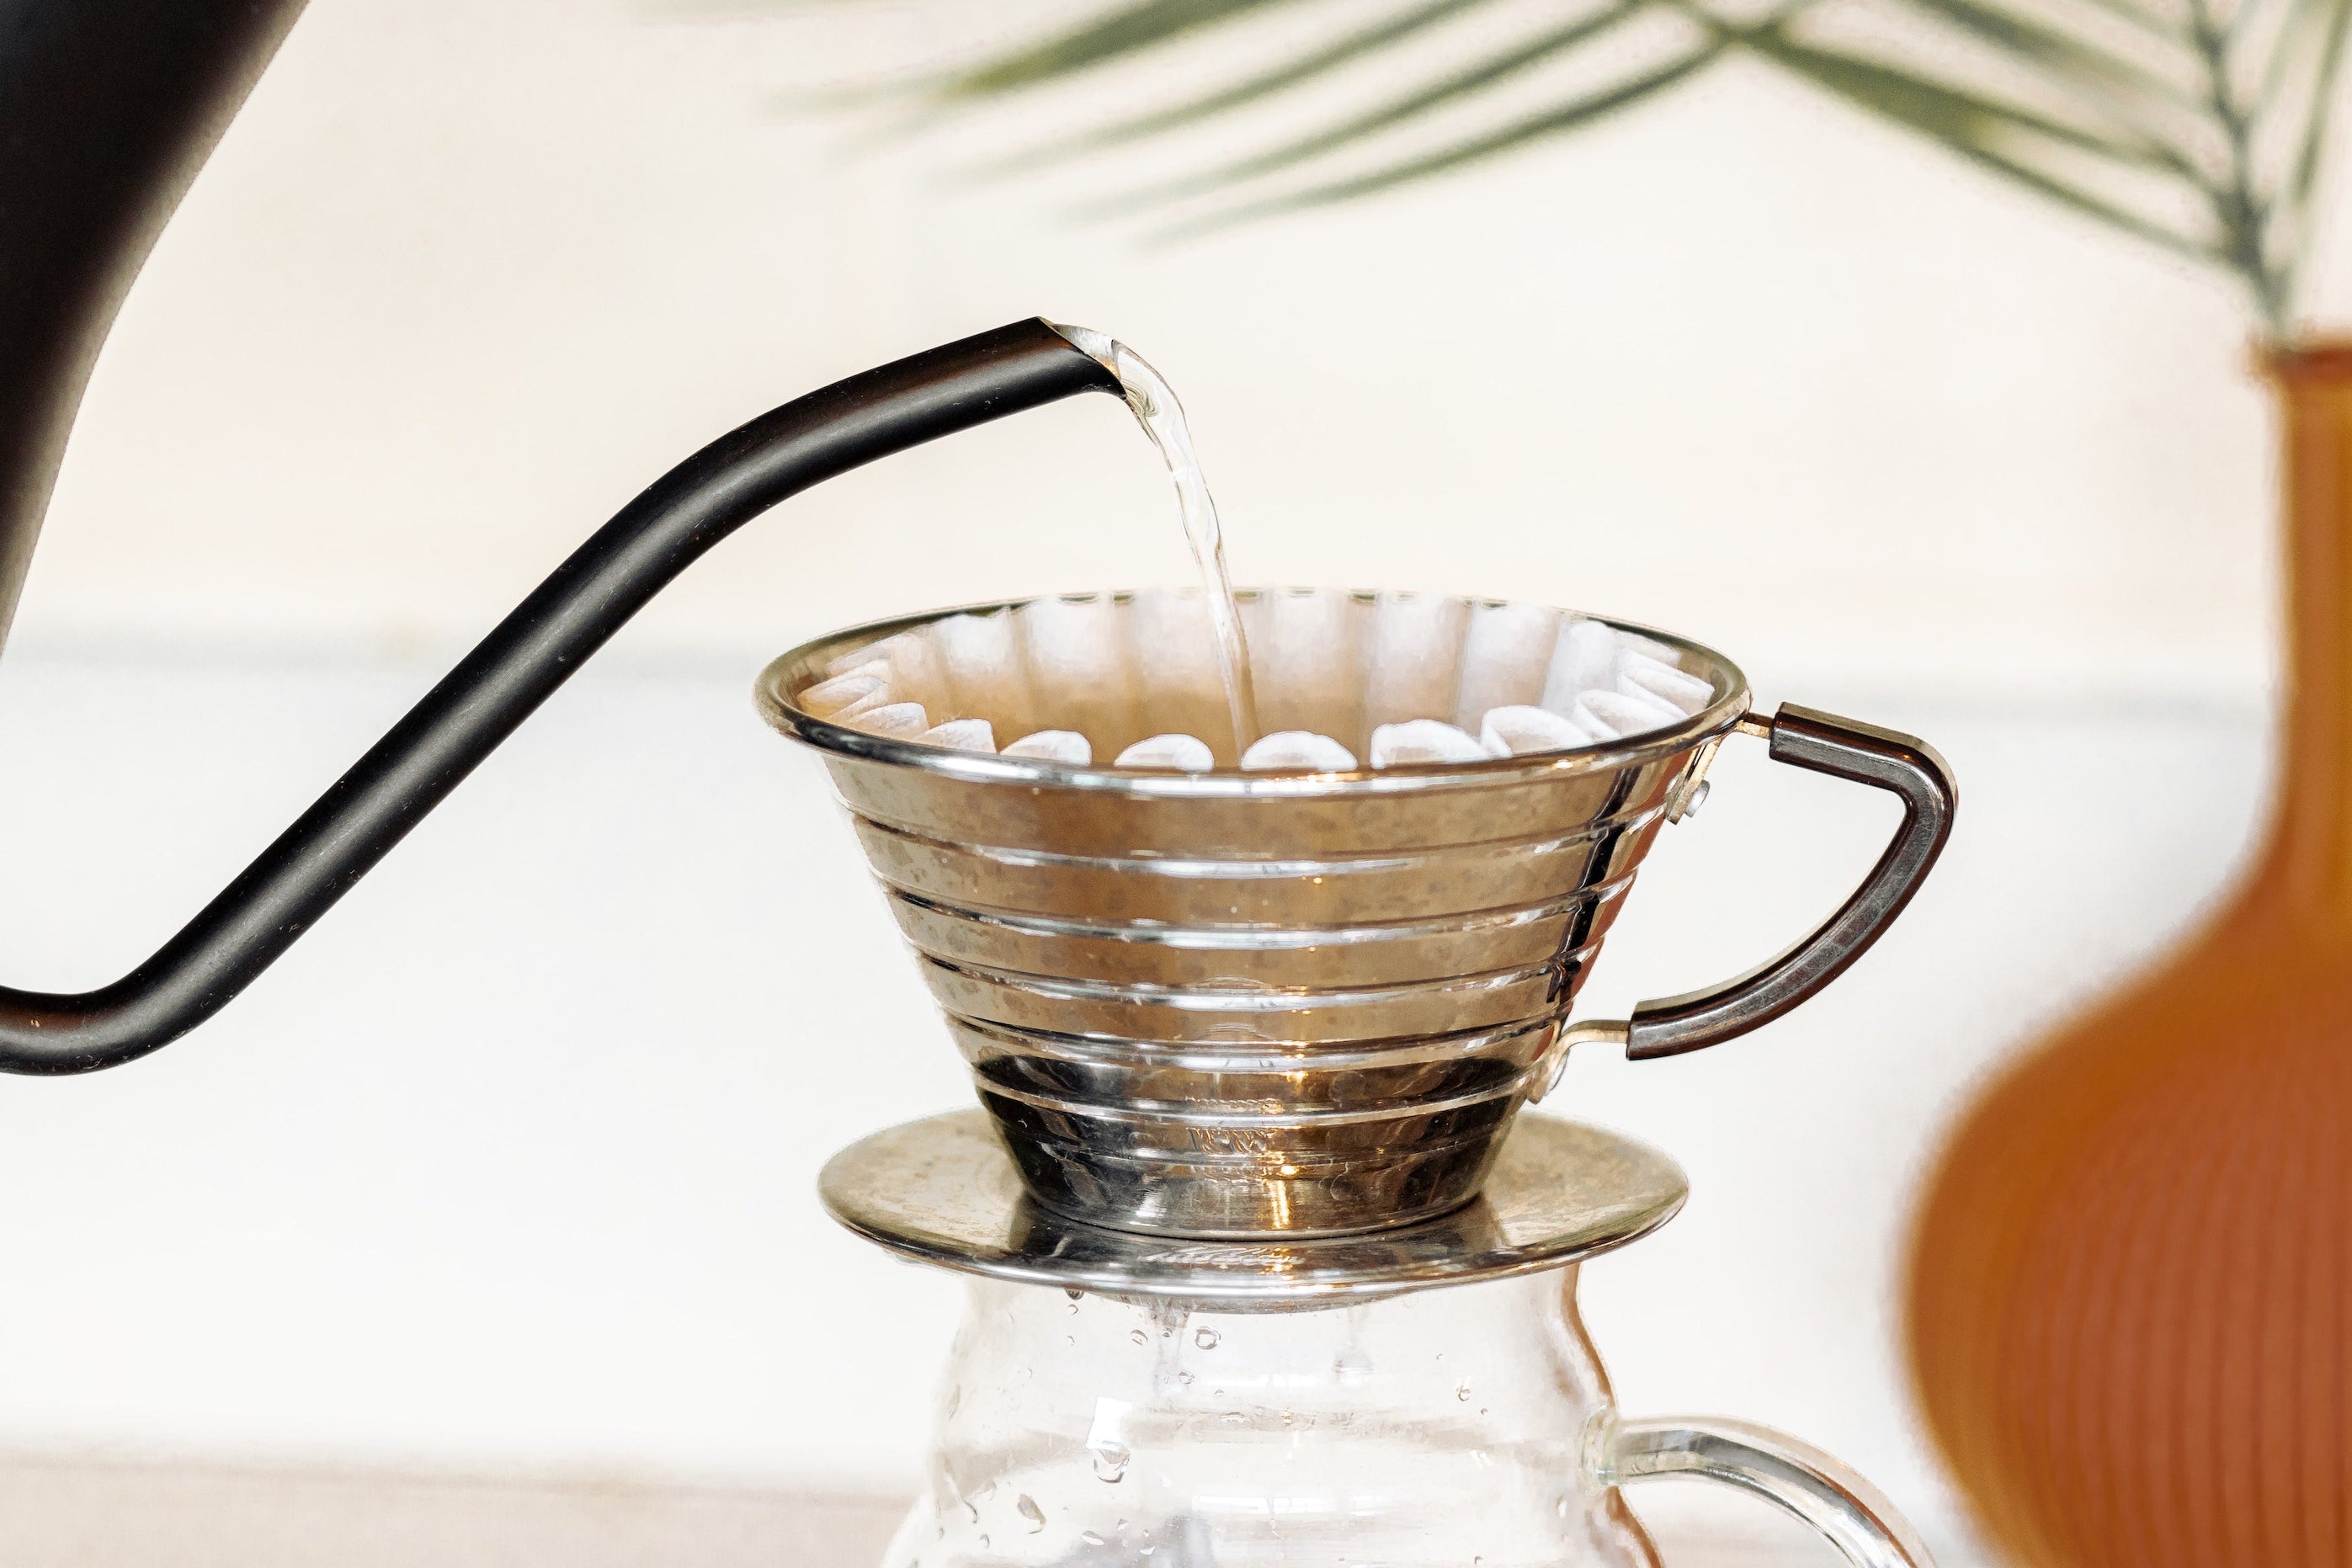 Pouring hot water to rinse and preheat a Kalita brewer and filter